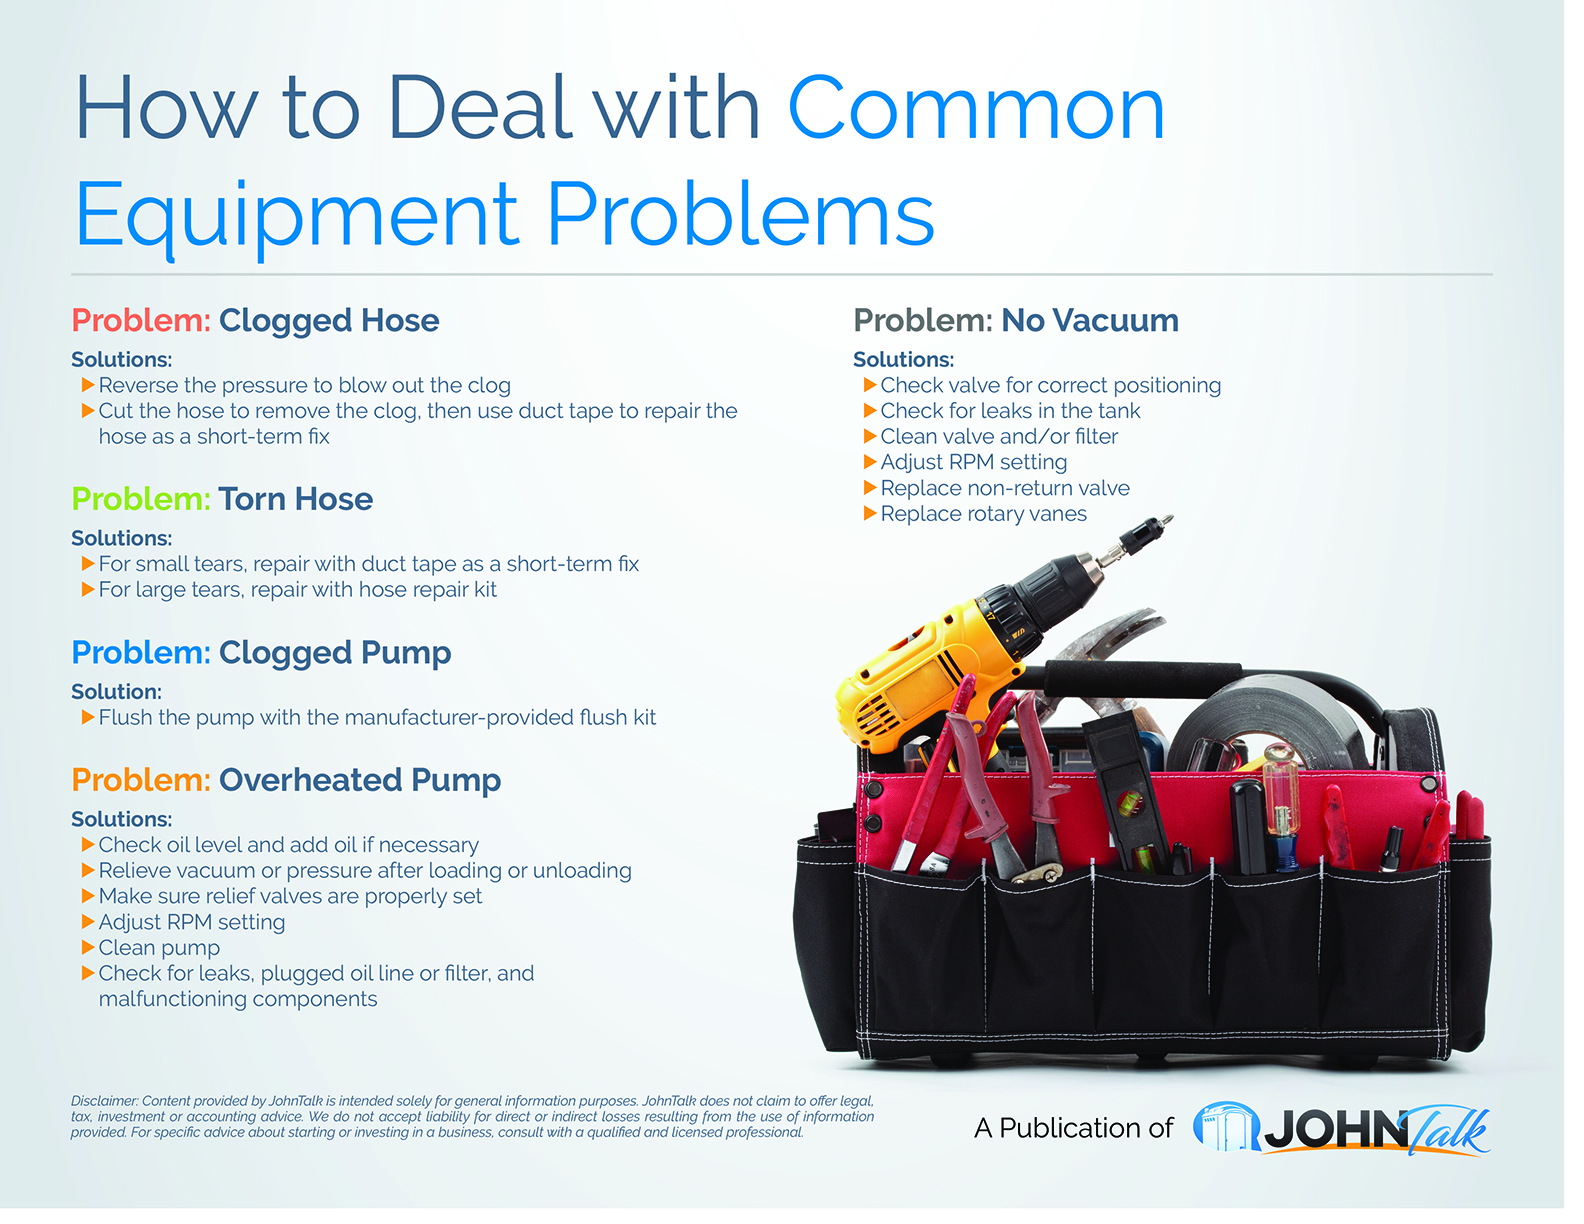 How to Deal with Common Equipment Problems